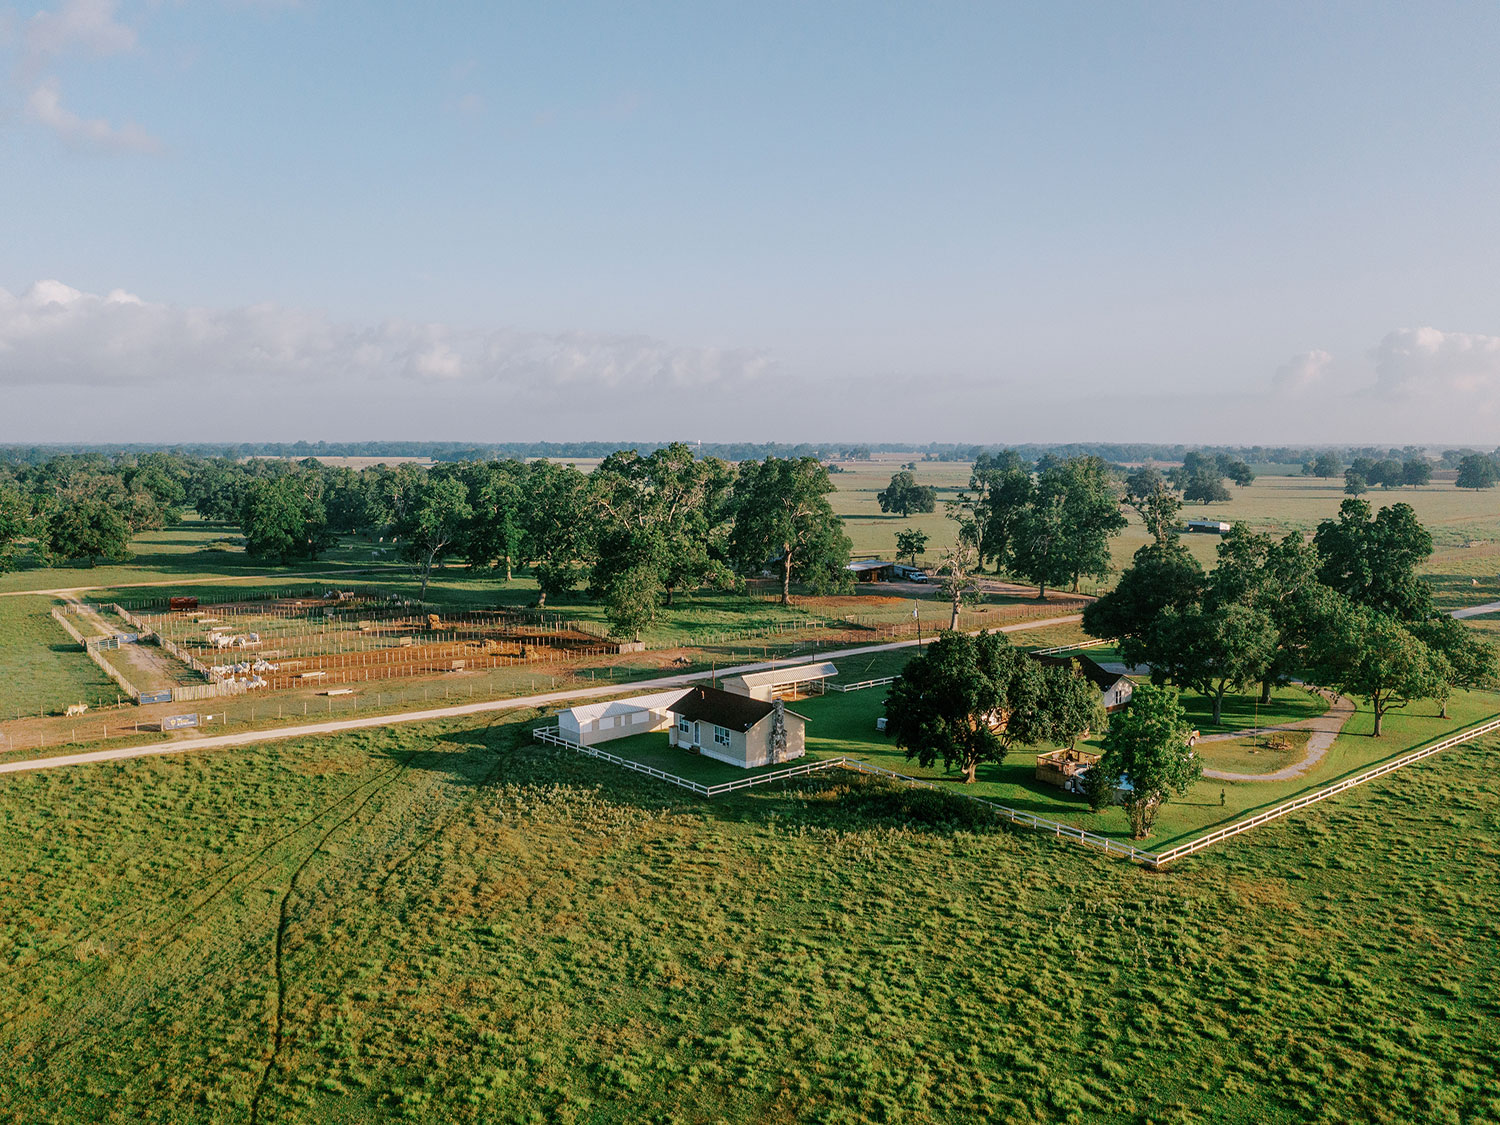 Ariel view of second largest brahman cattle ranch in Texas.